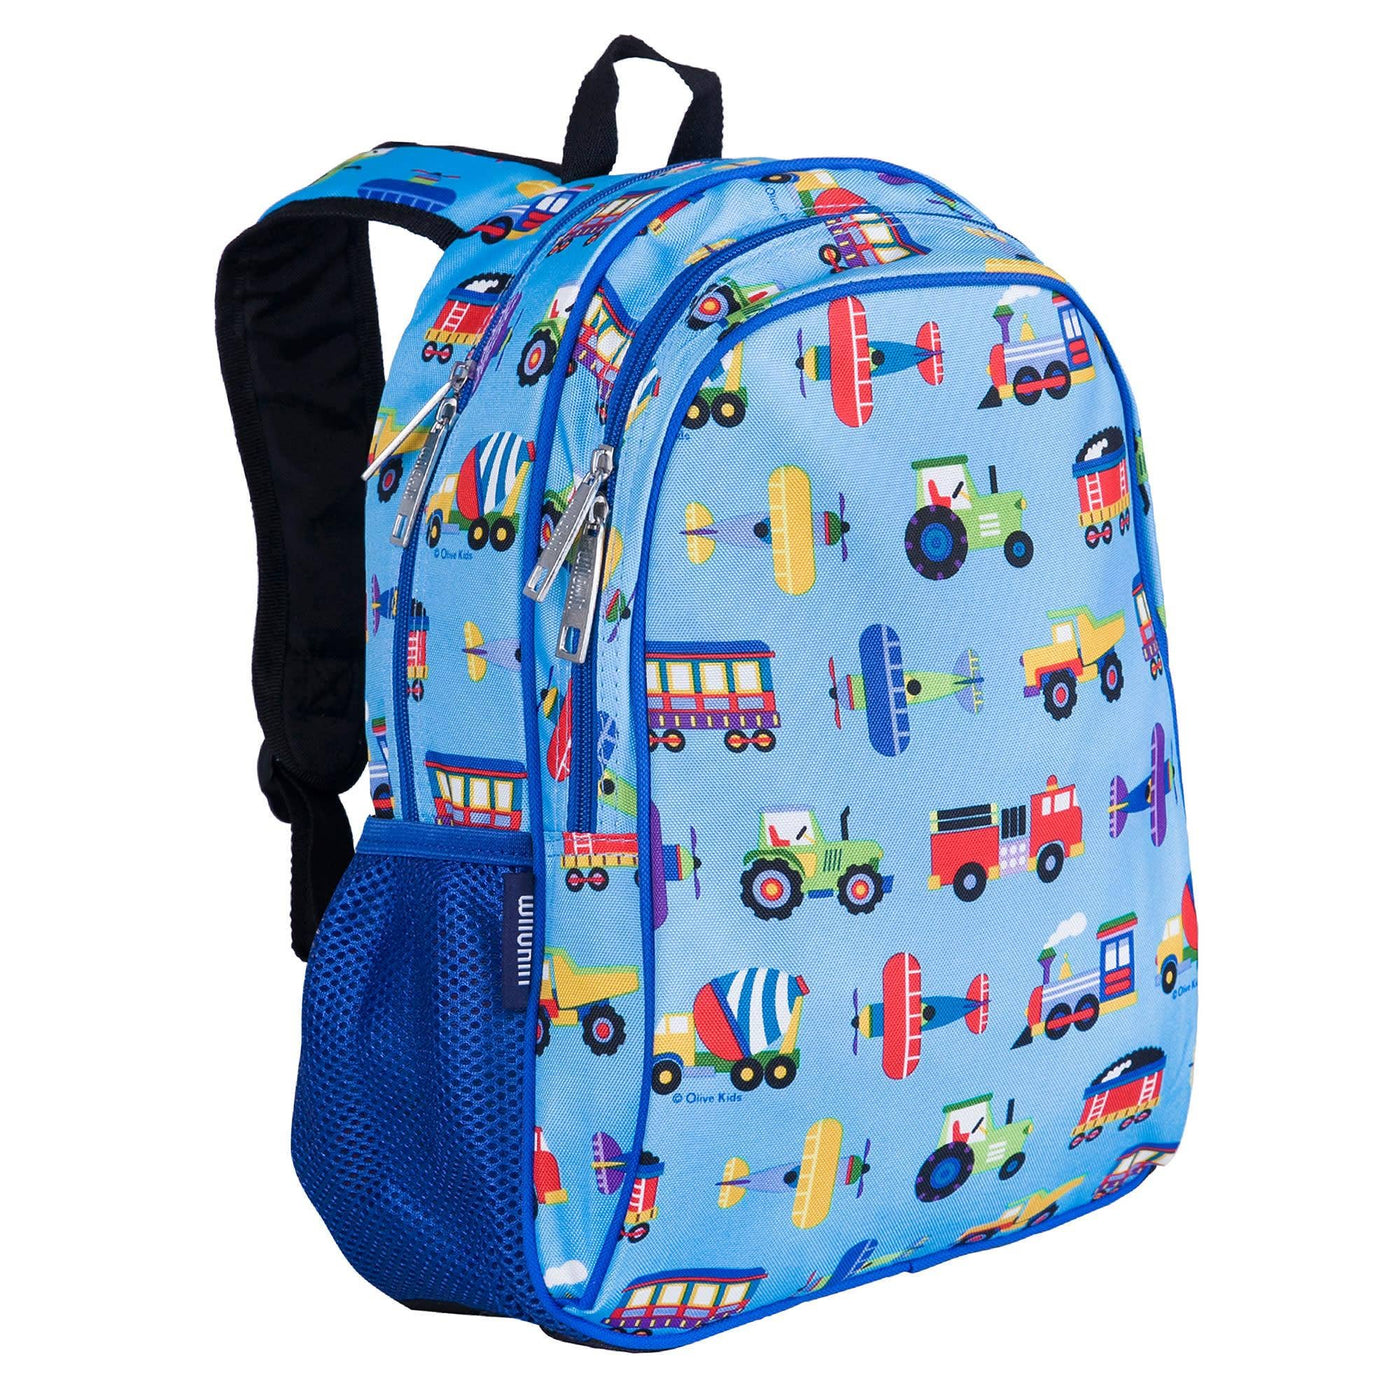 Wildkin - Trains Planes and Trucks Backpack - 15 Inch